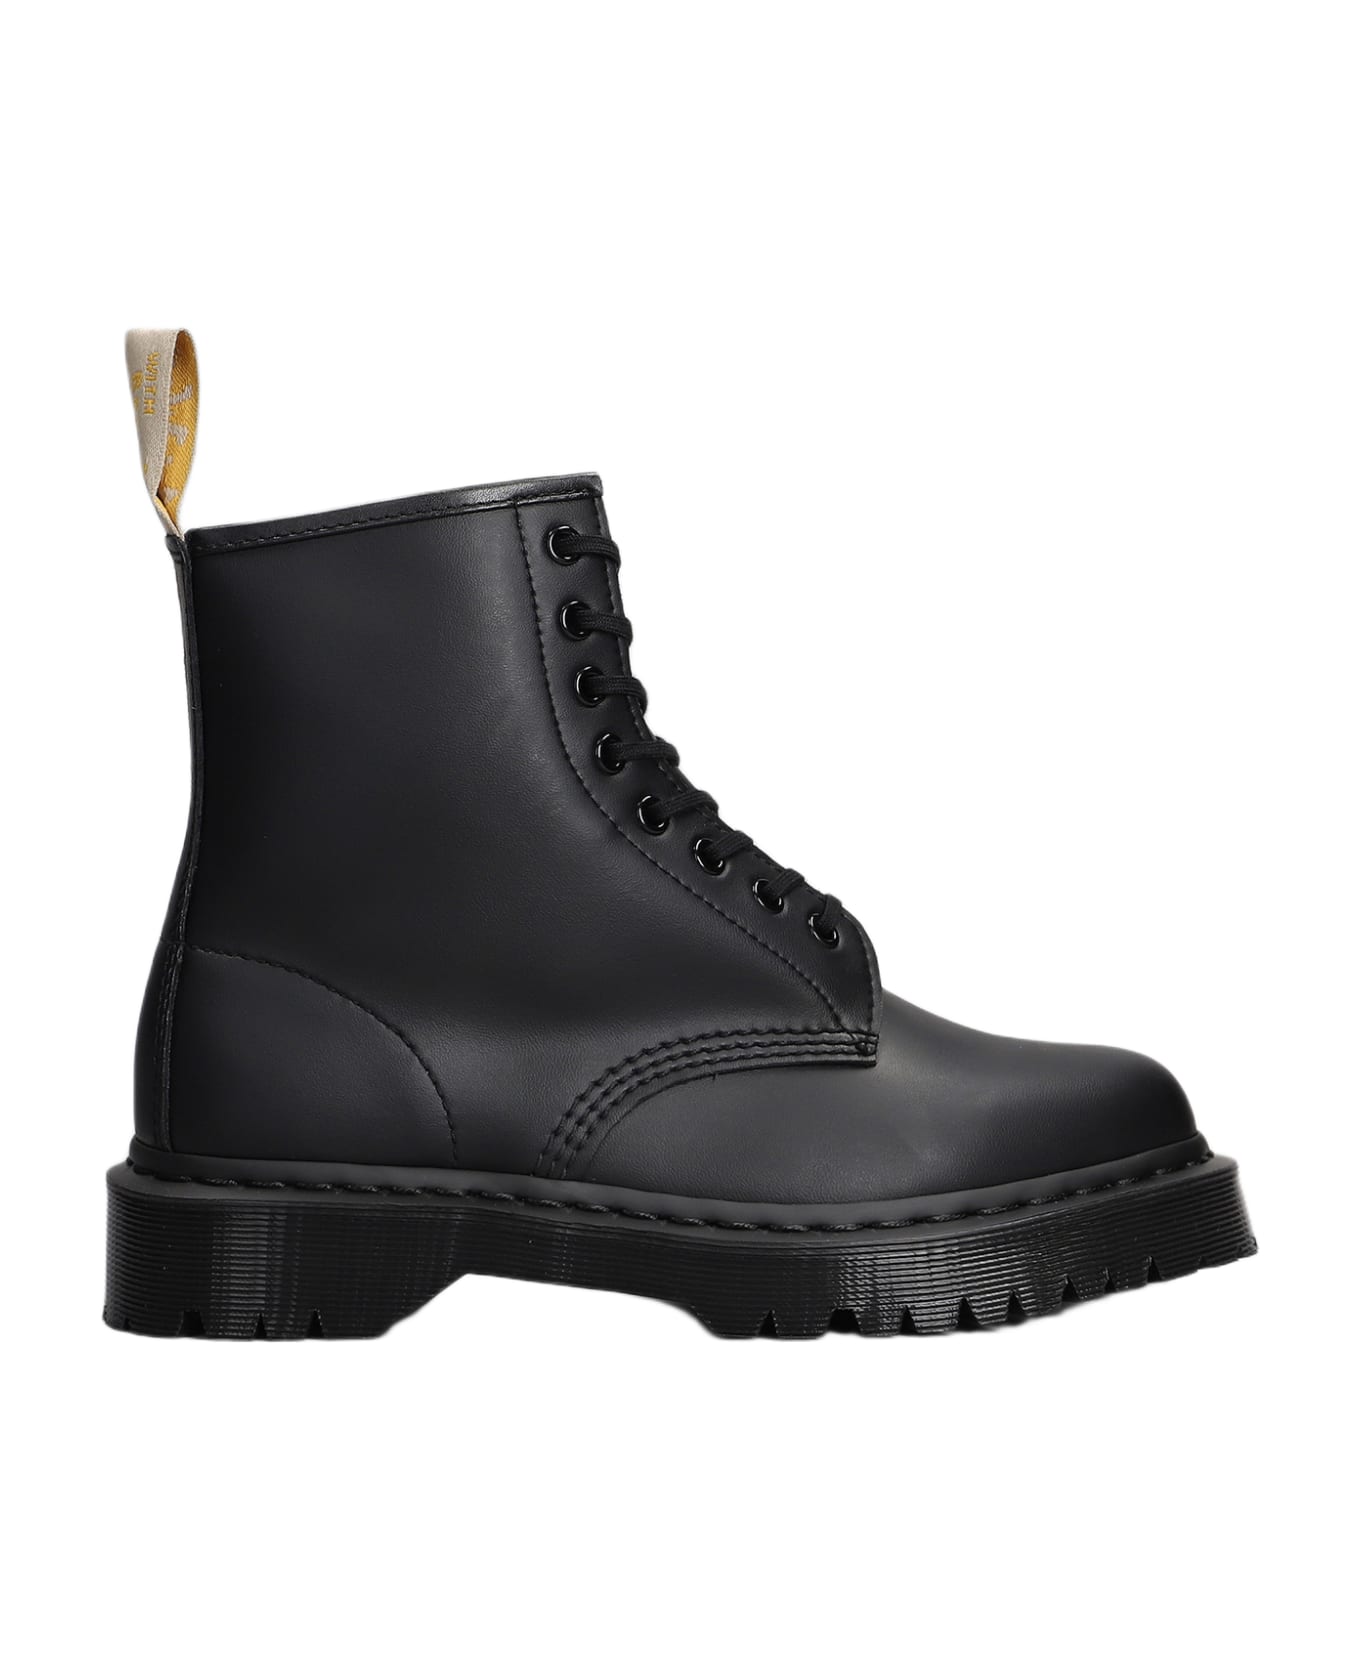 Dr. Martens 1460 Mono Combat Boots In Black Leather - black ブーツ